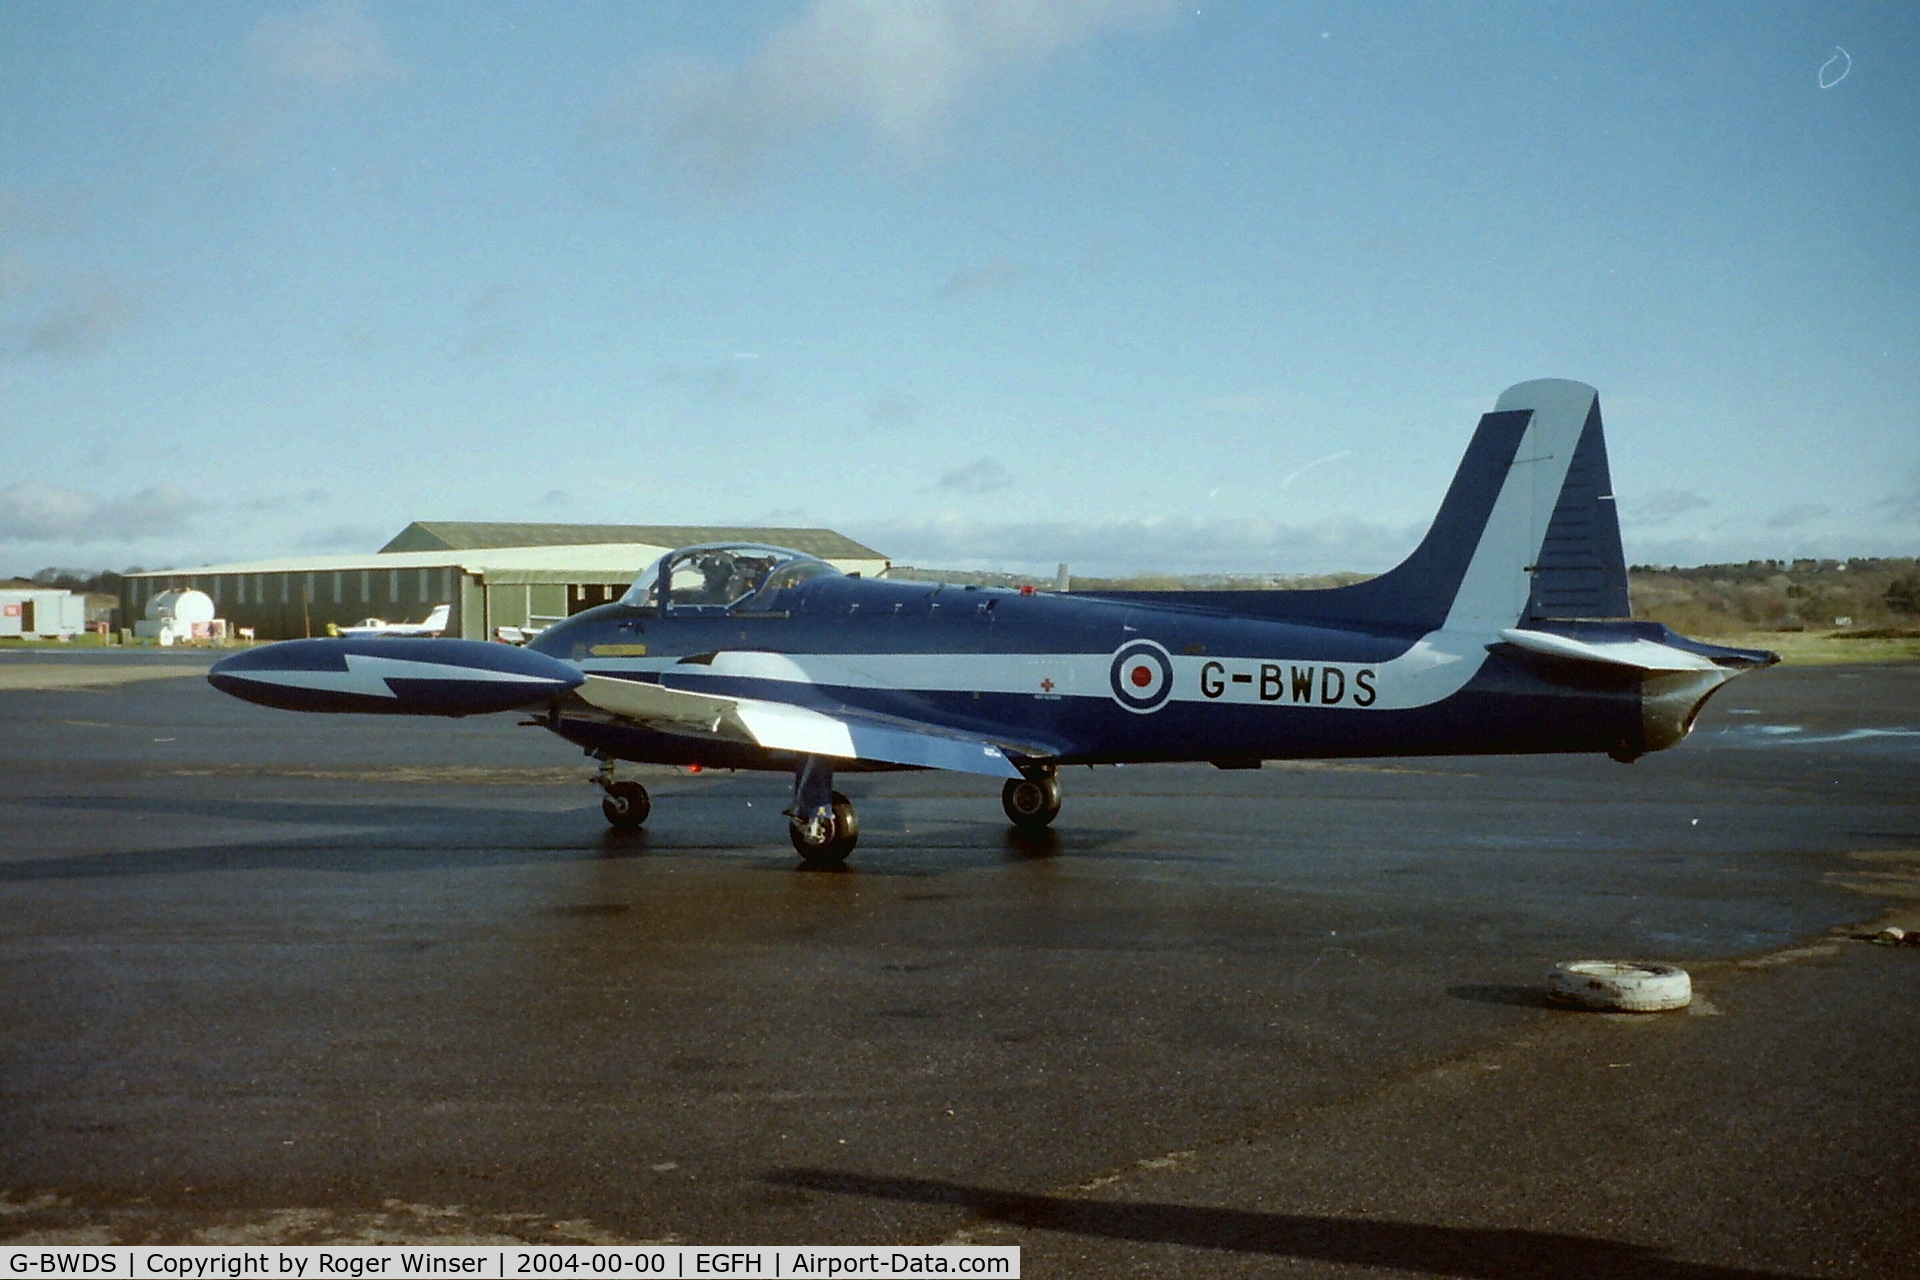 G-BWDS, 1960 Hunting P-84 Jet Provost T.3A C/N PAC/W/9231, Formerly XW424 in RAF service. Based at Swansea Airport in 2004?